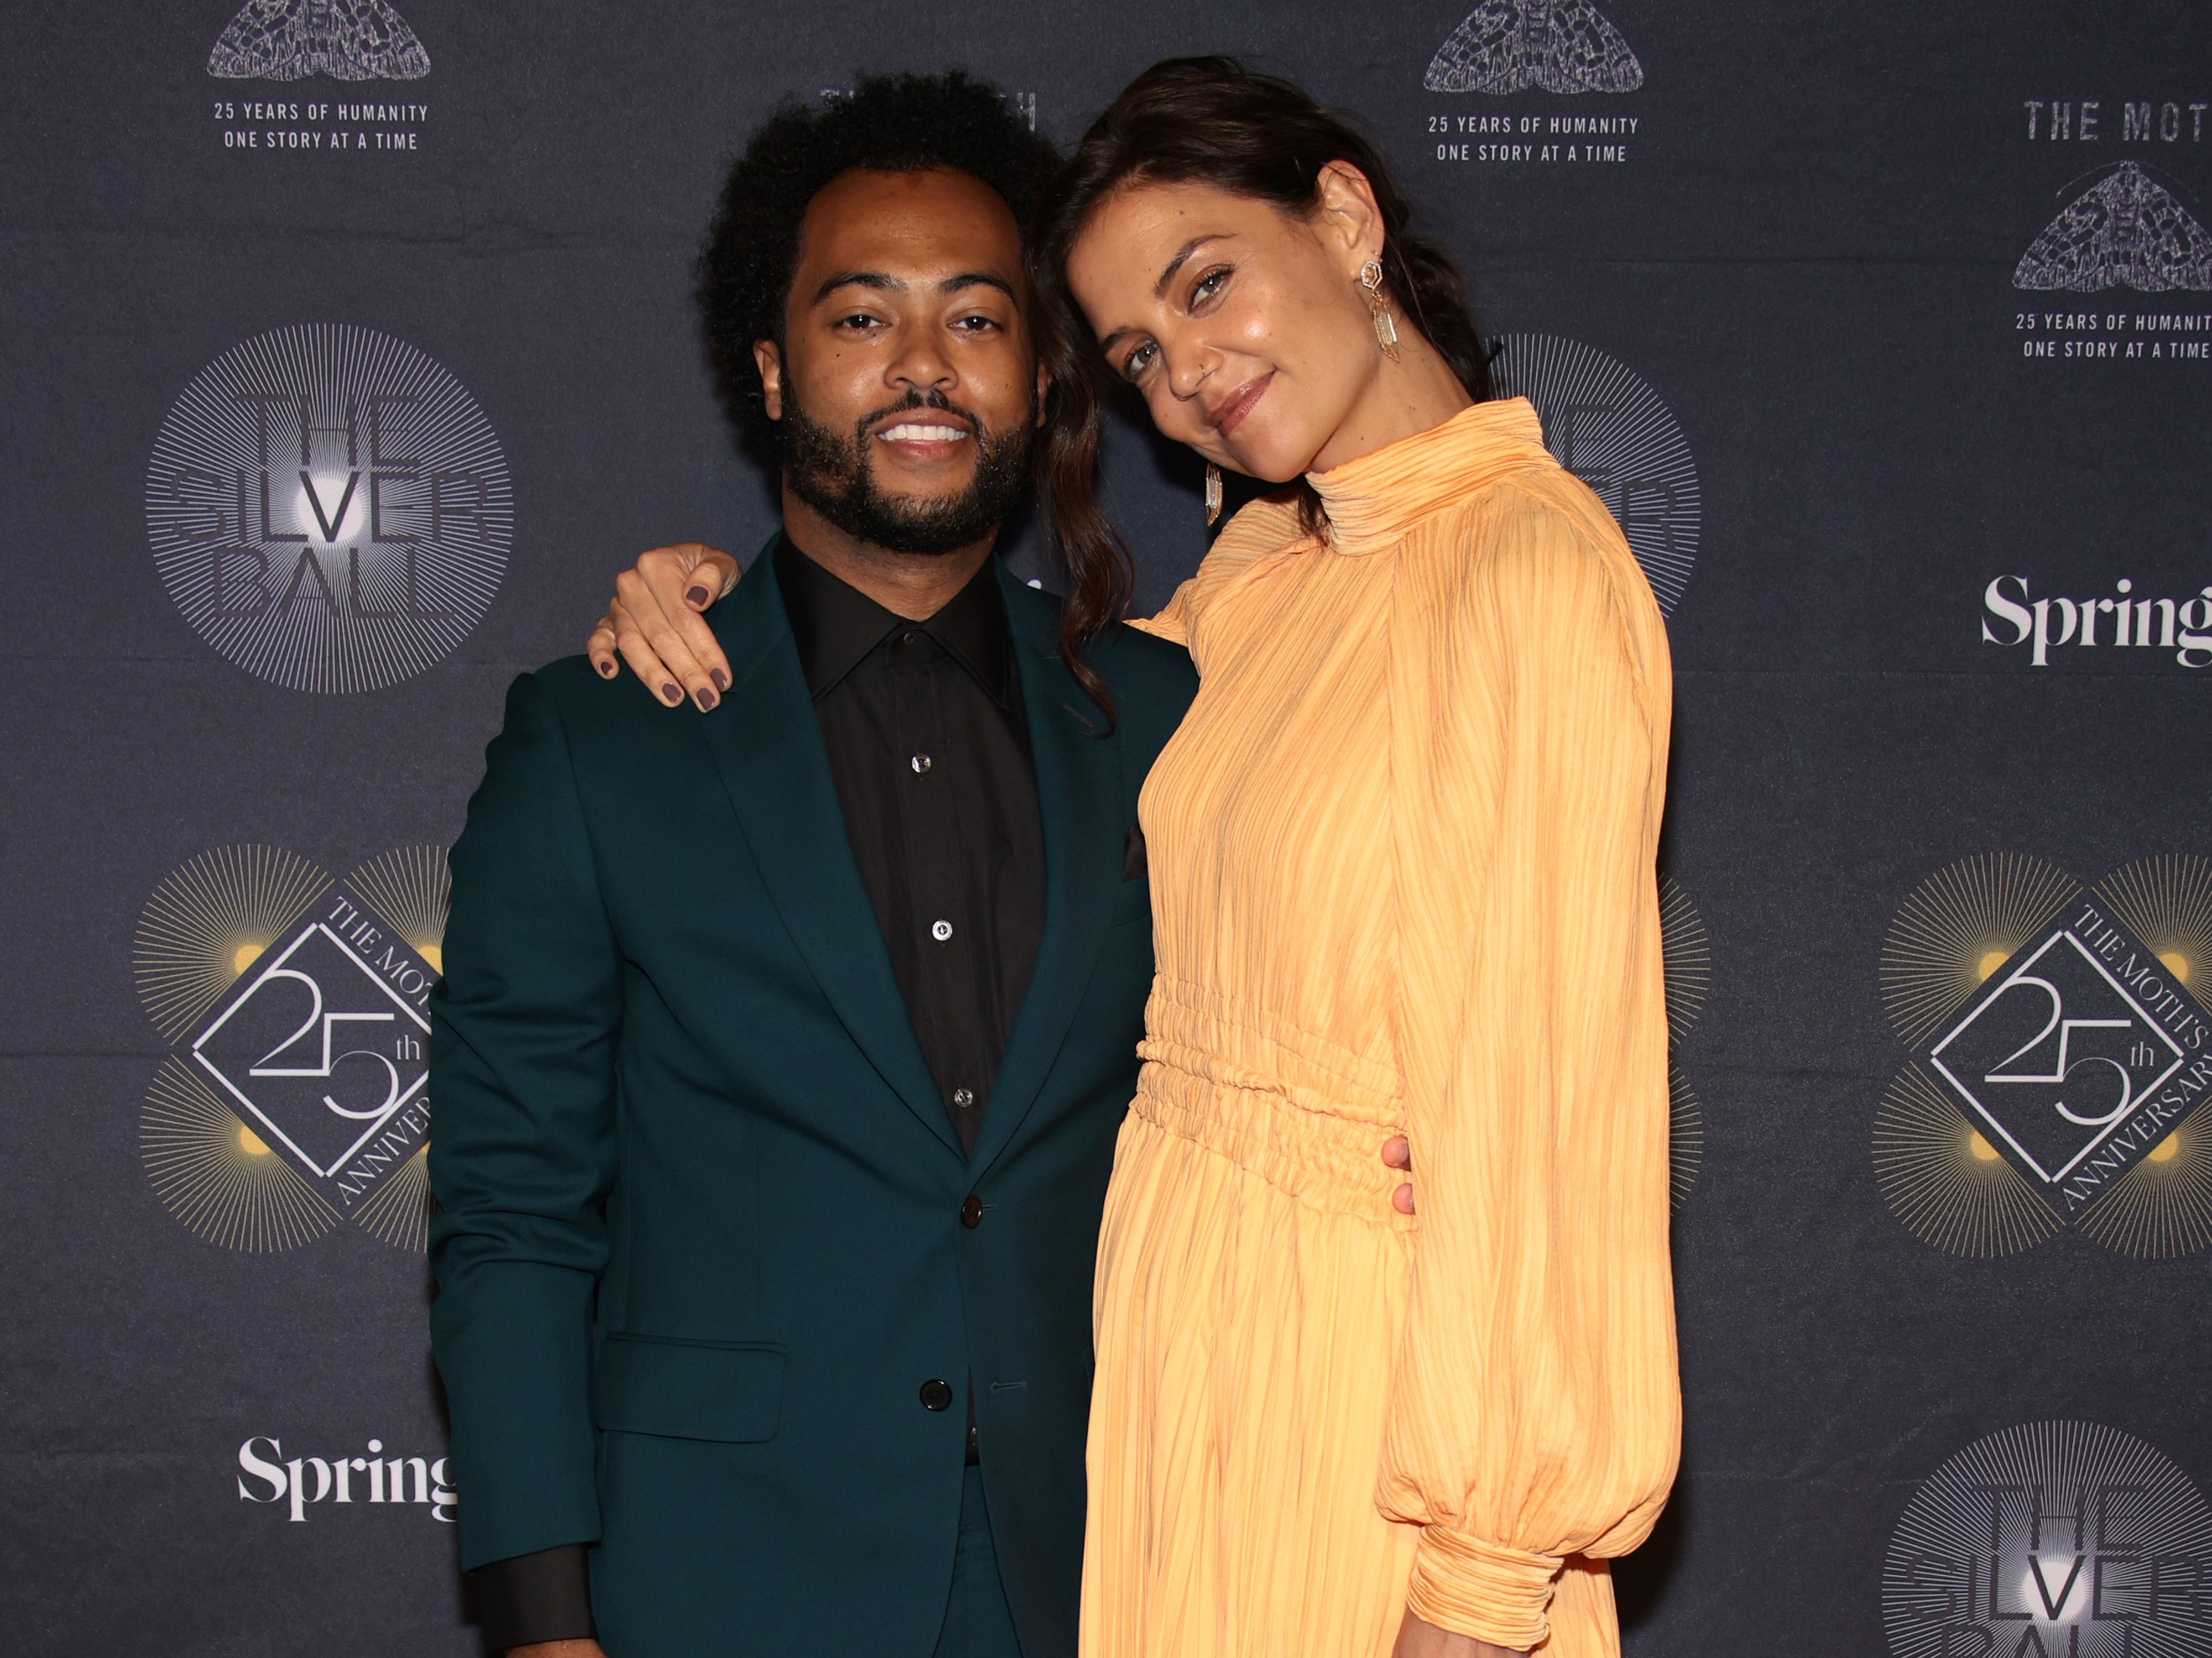 Bobby Wooten III and Katie Holmes attend The Moth Ball 25th Anniversary Gala at Spring Studios on May 26, 2022